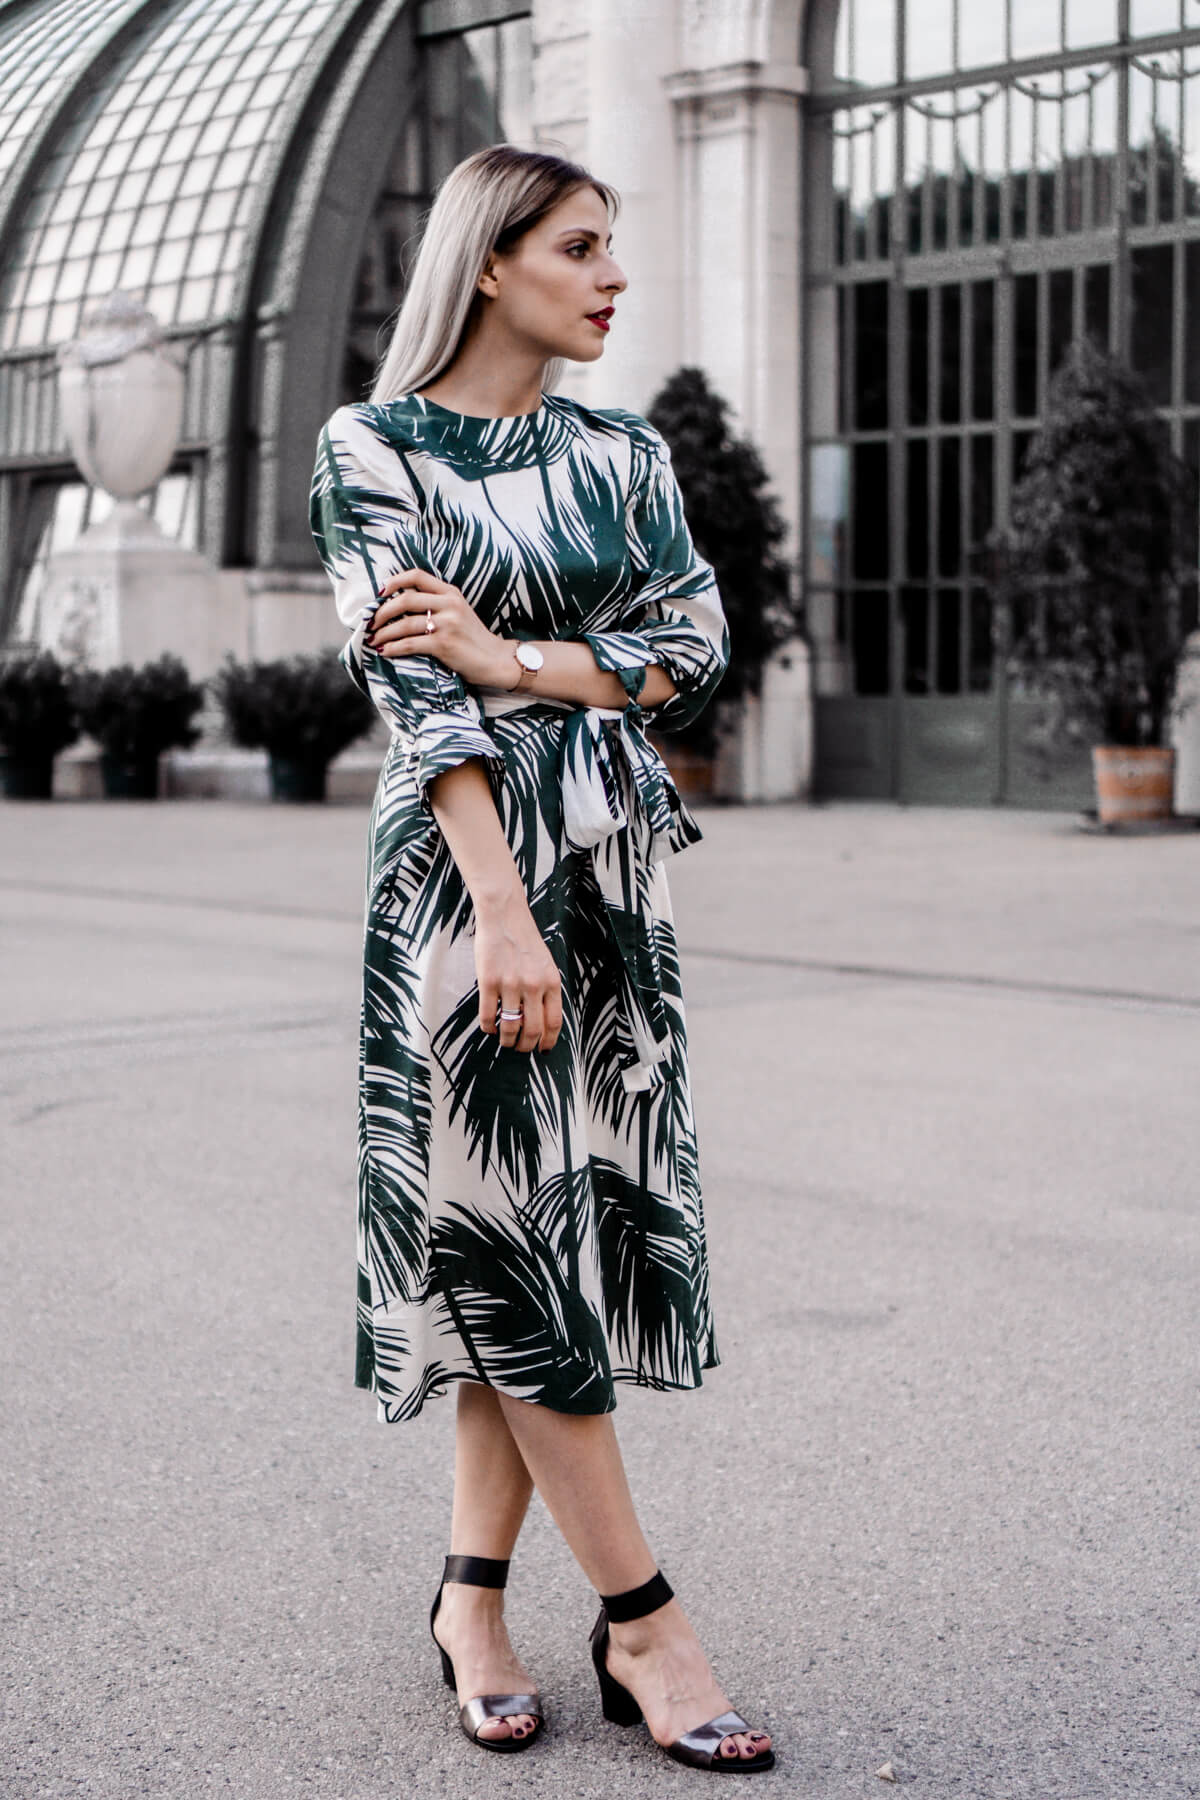 How to style palm tree printed dress